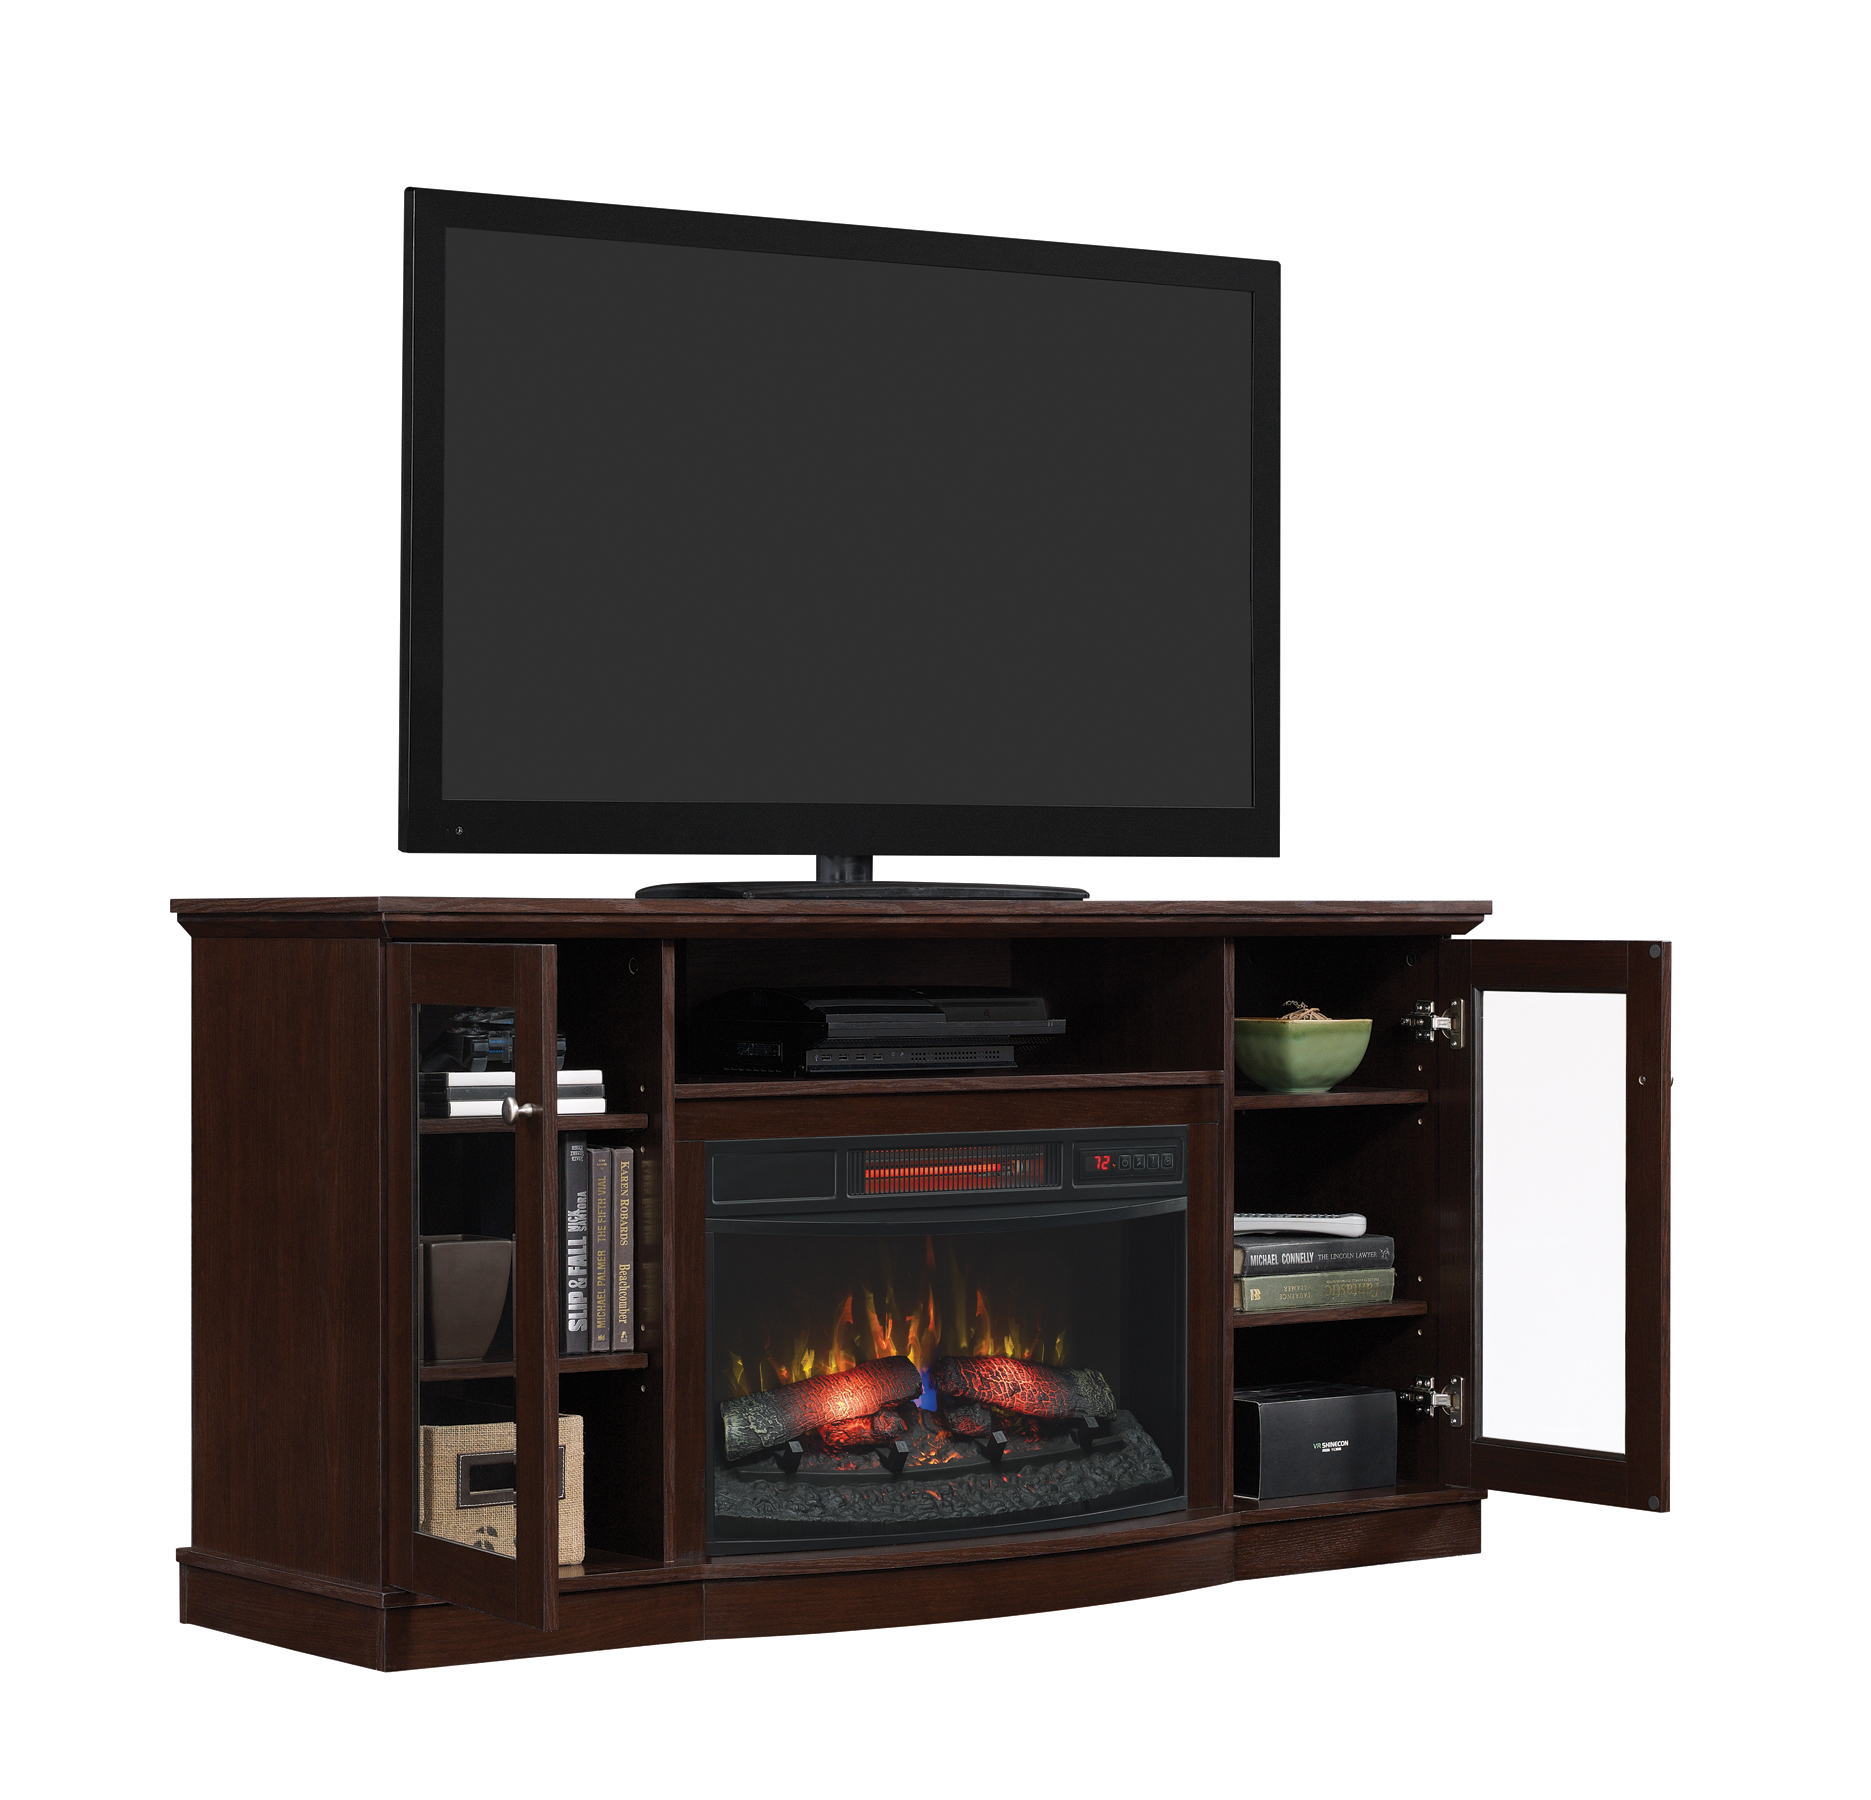 ChimneyFree Media Electric Fireplace for TVs up to 65'', Multiple Colors